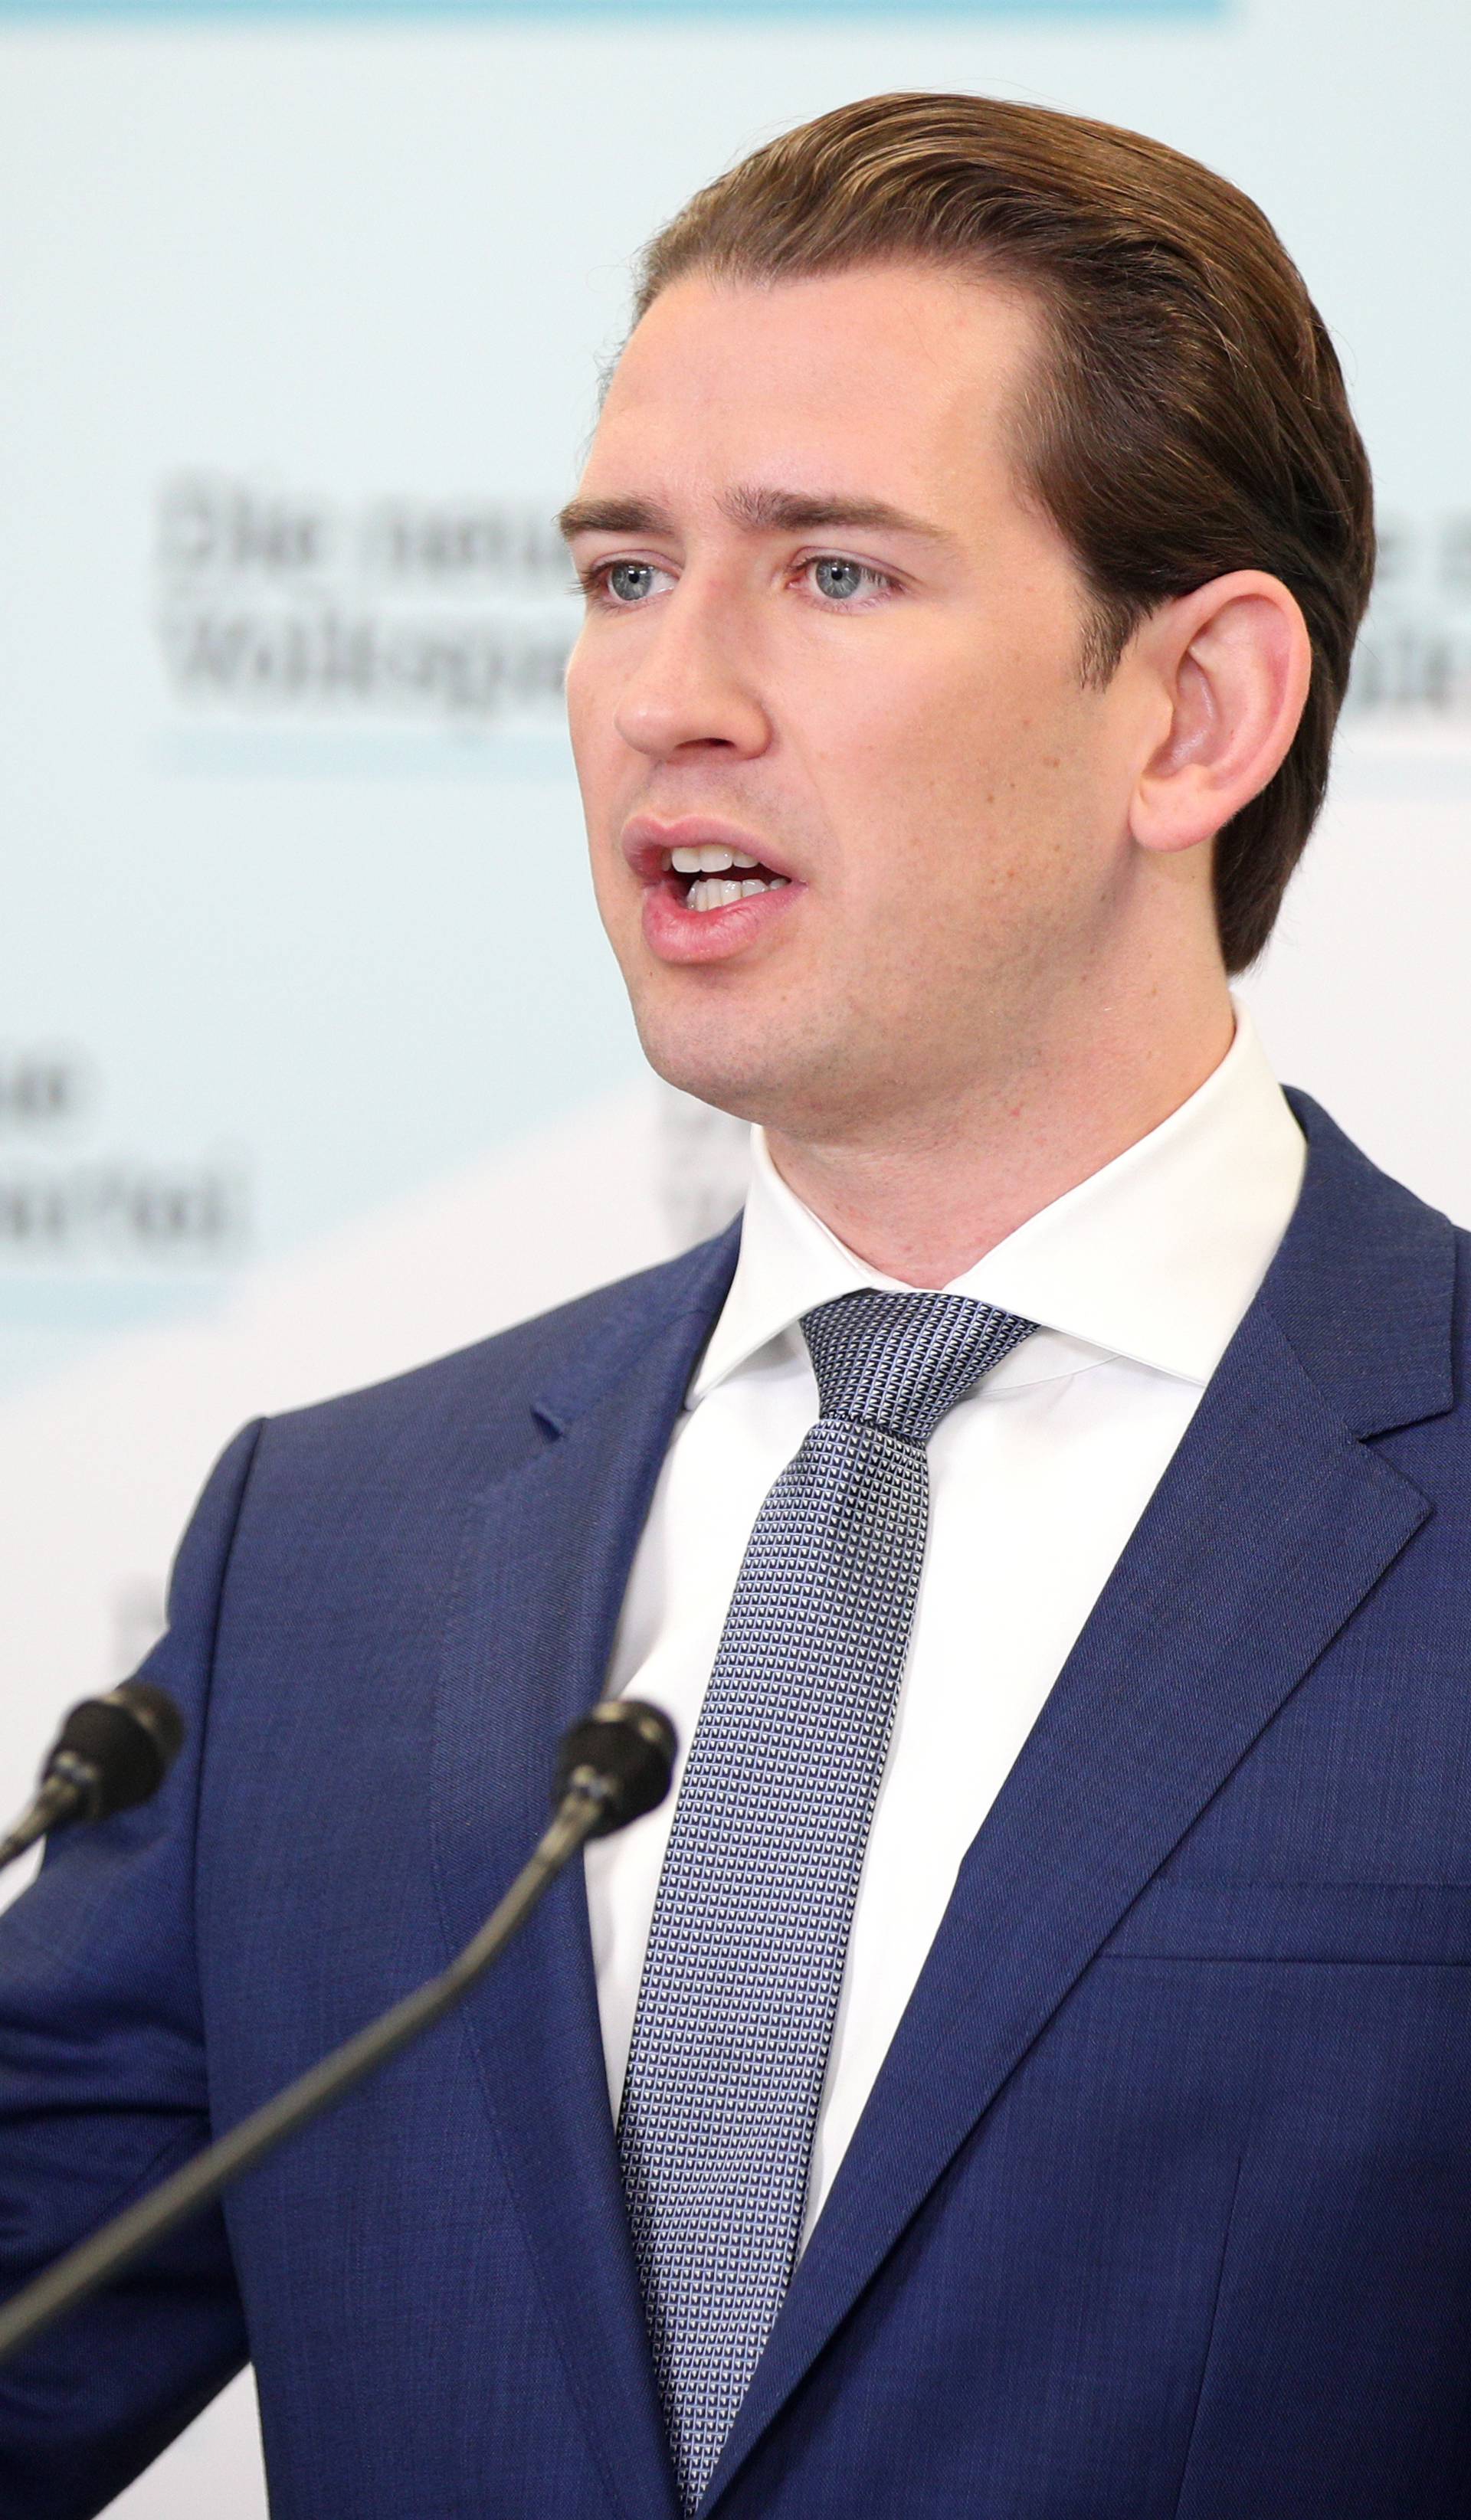 Head of Peoples Party (OeVP) Sebastian Kurz addresses a news conference in Vienna